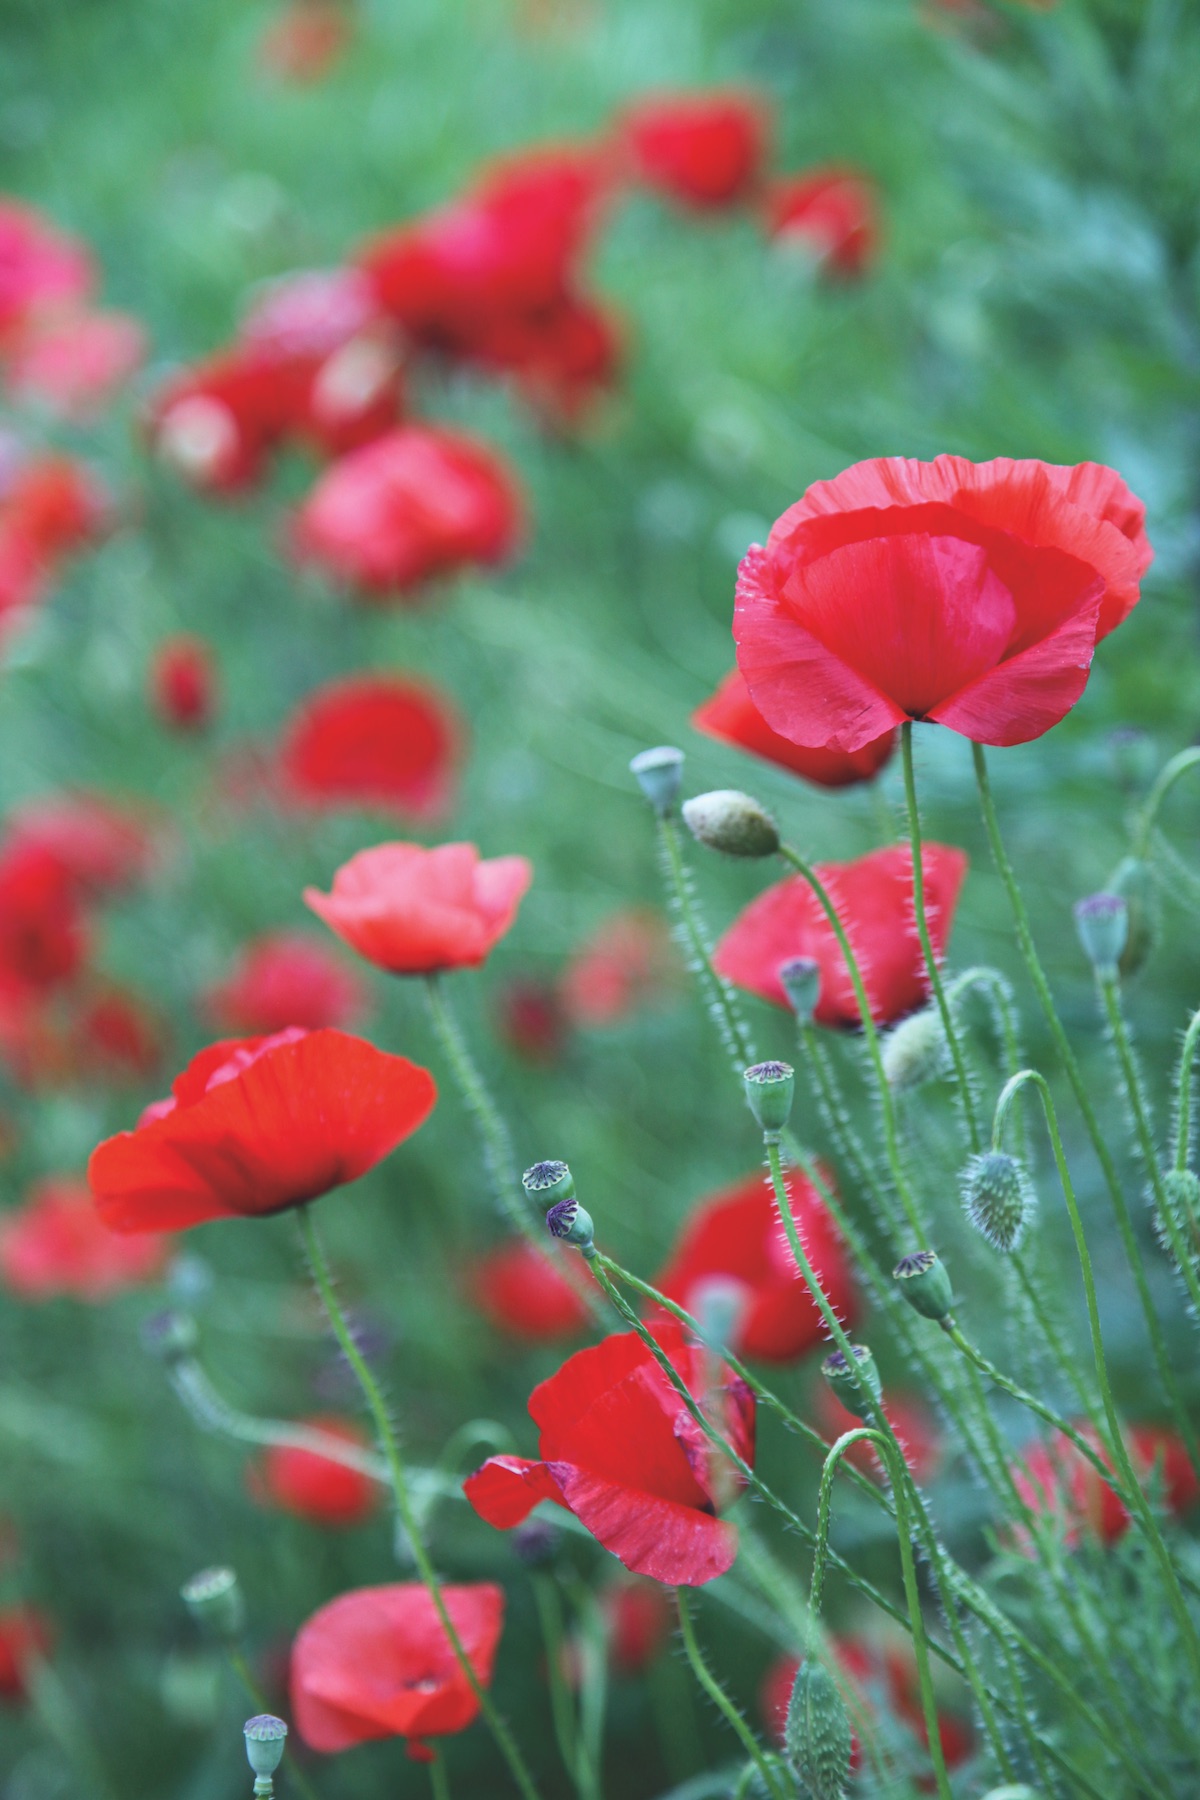 A treasure trove of red poppies flowering in Charlotte Moss's garden.